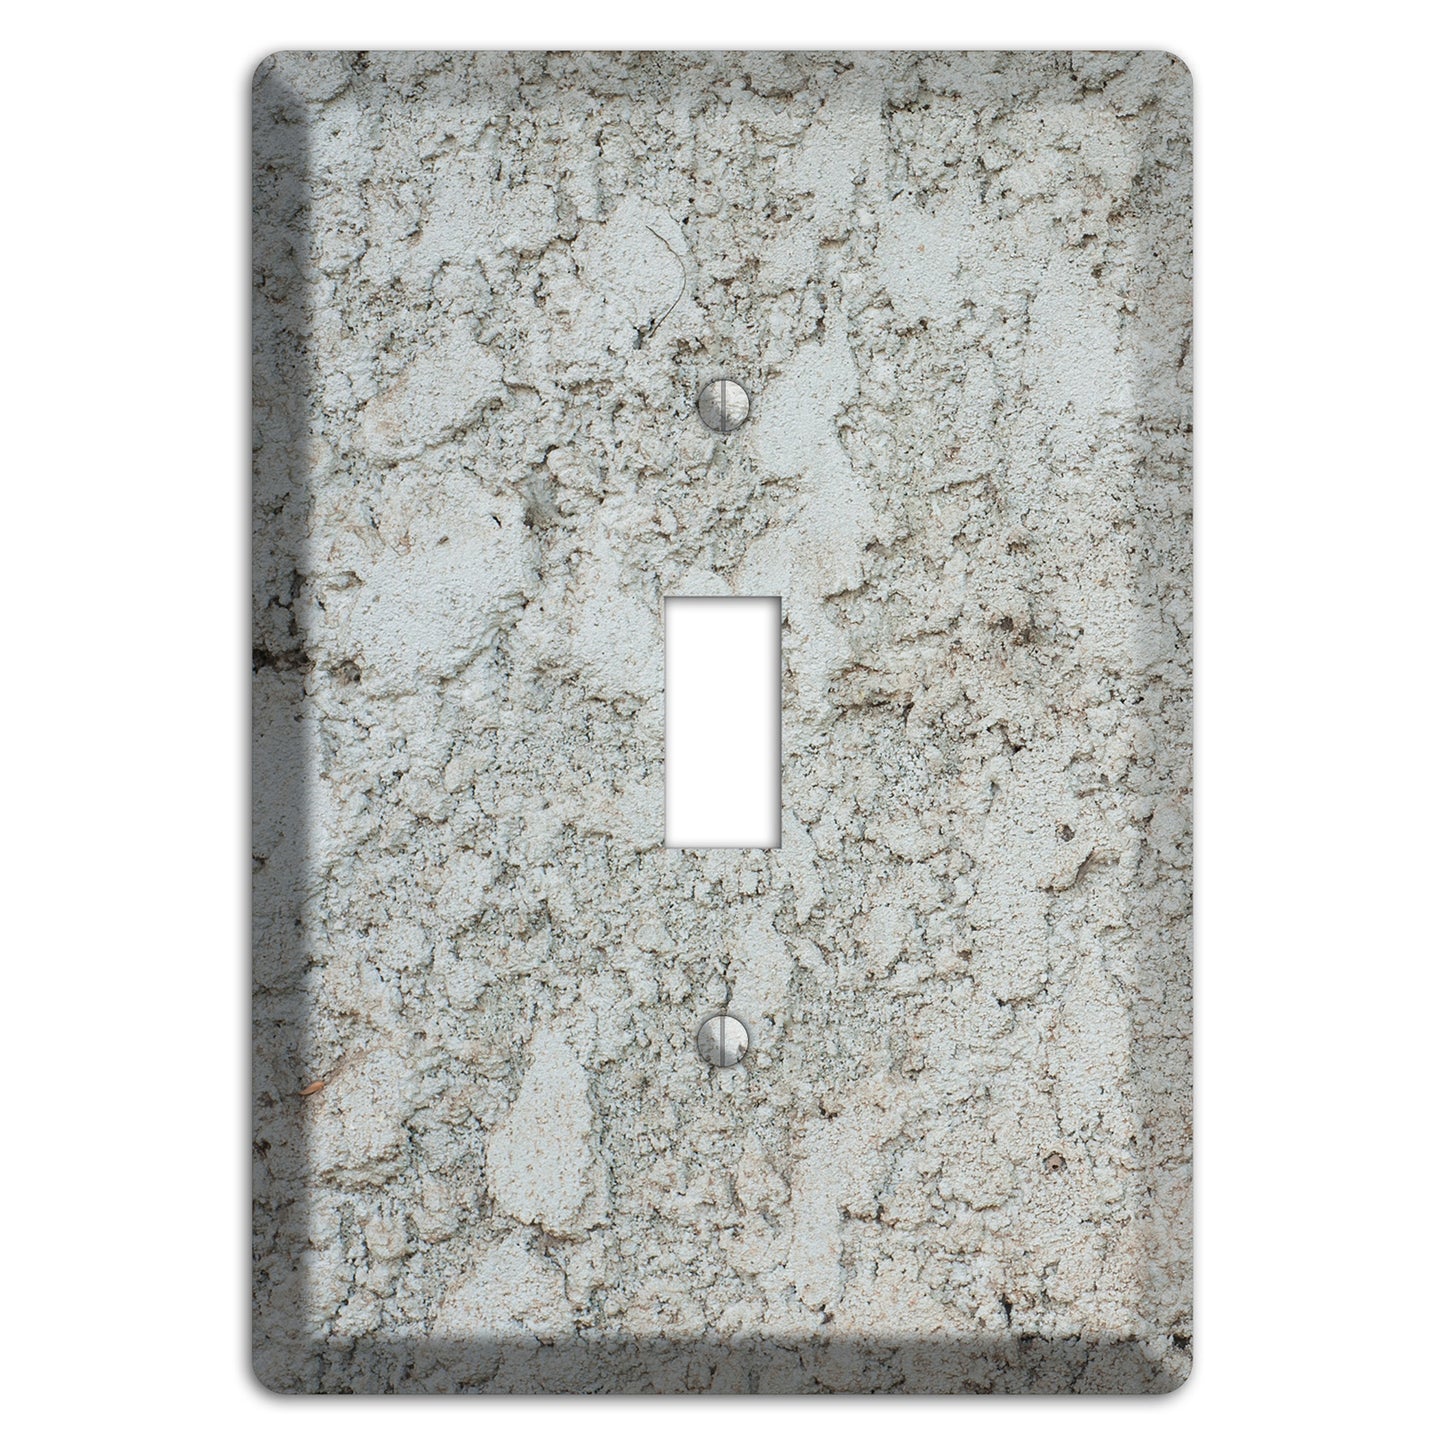 Plaster 6 Cover Plates